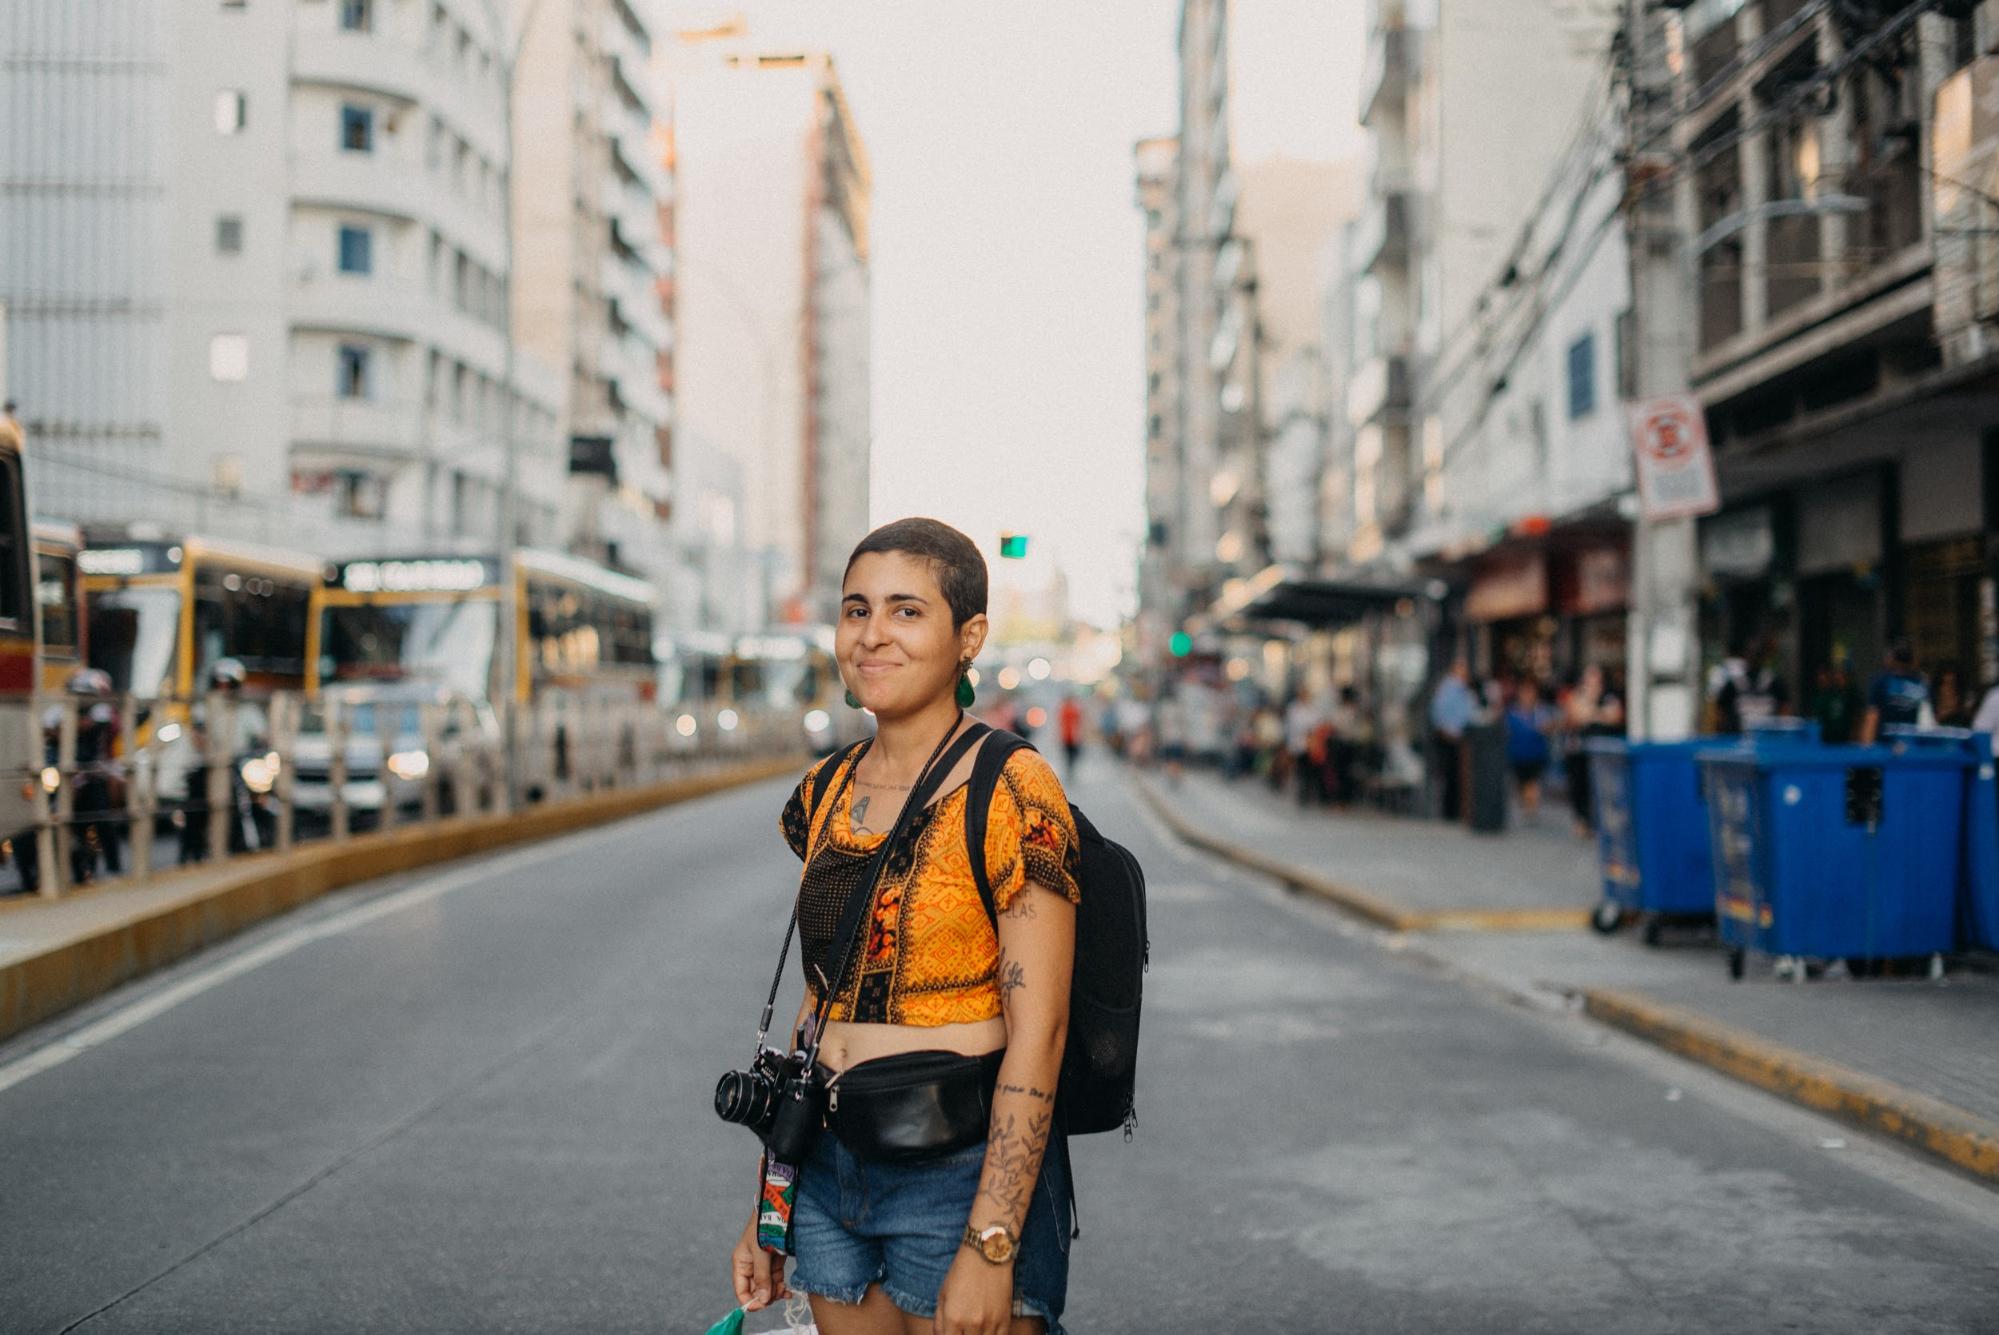 Photographer Céu Albuquerque standing in the middle of a city street with camera gear draped around her